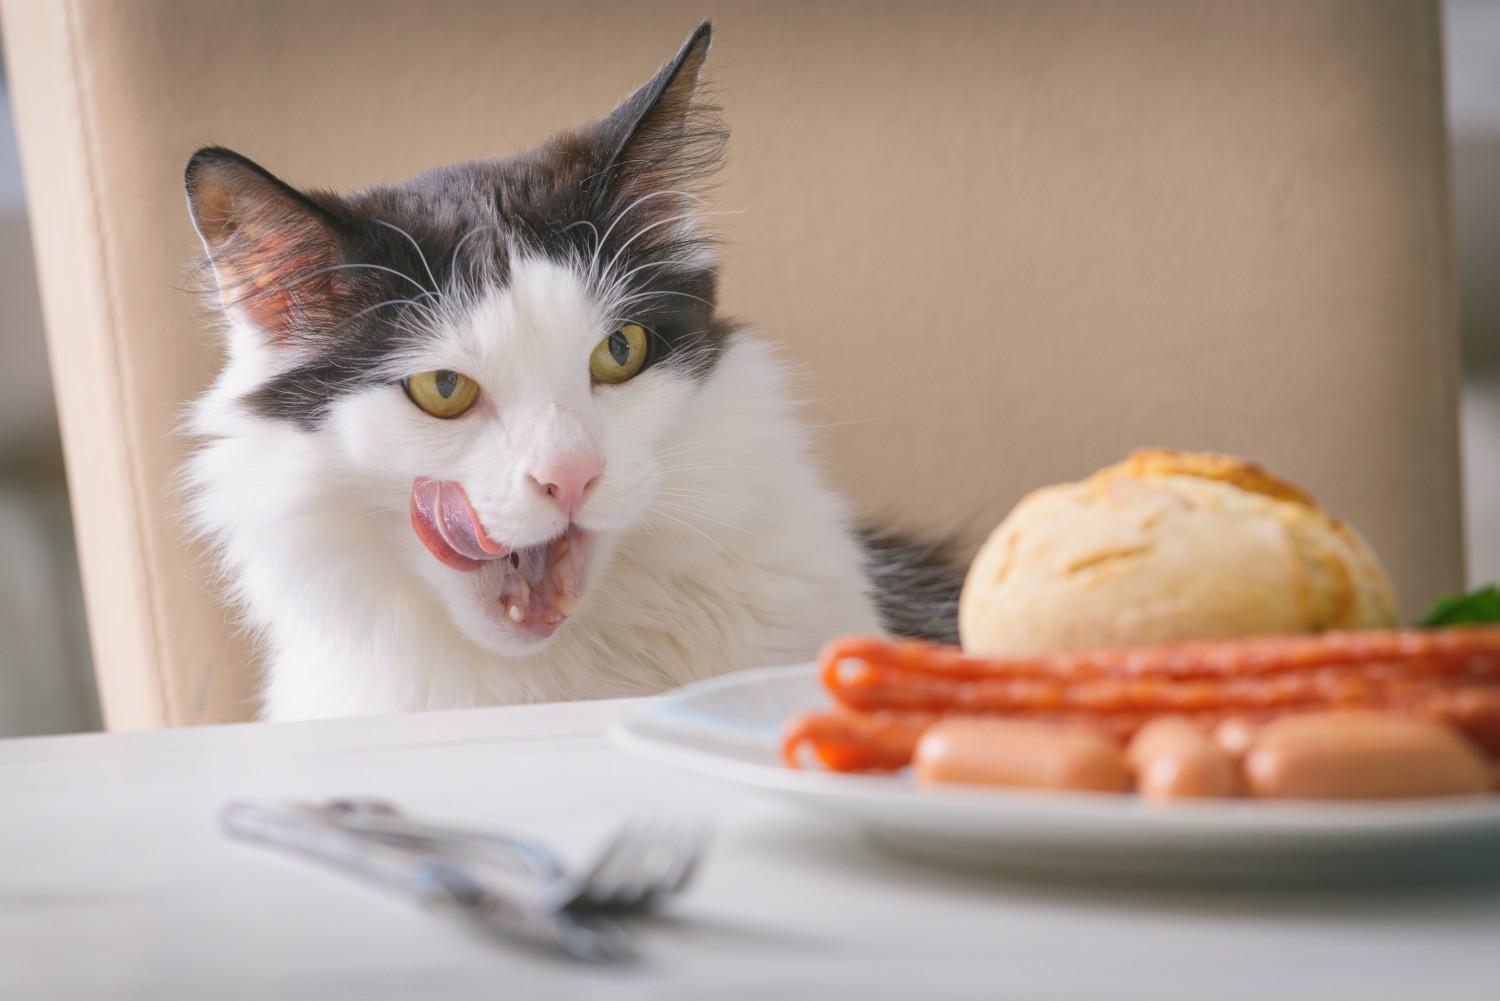 Cat licking it's lips at food on table